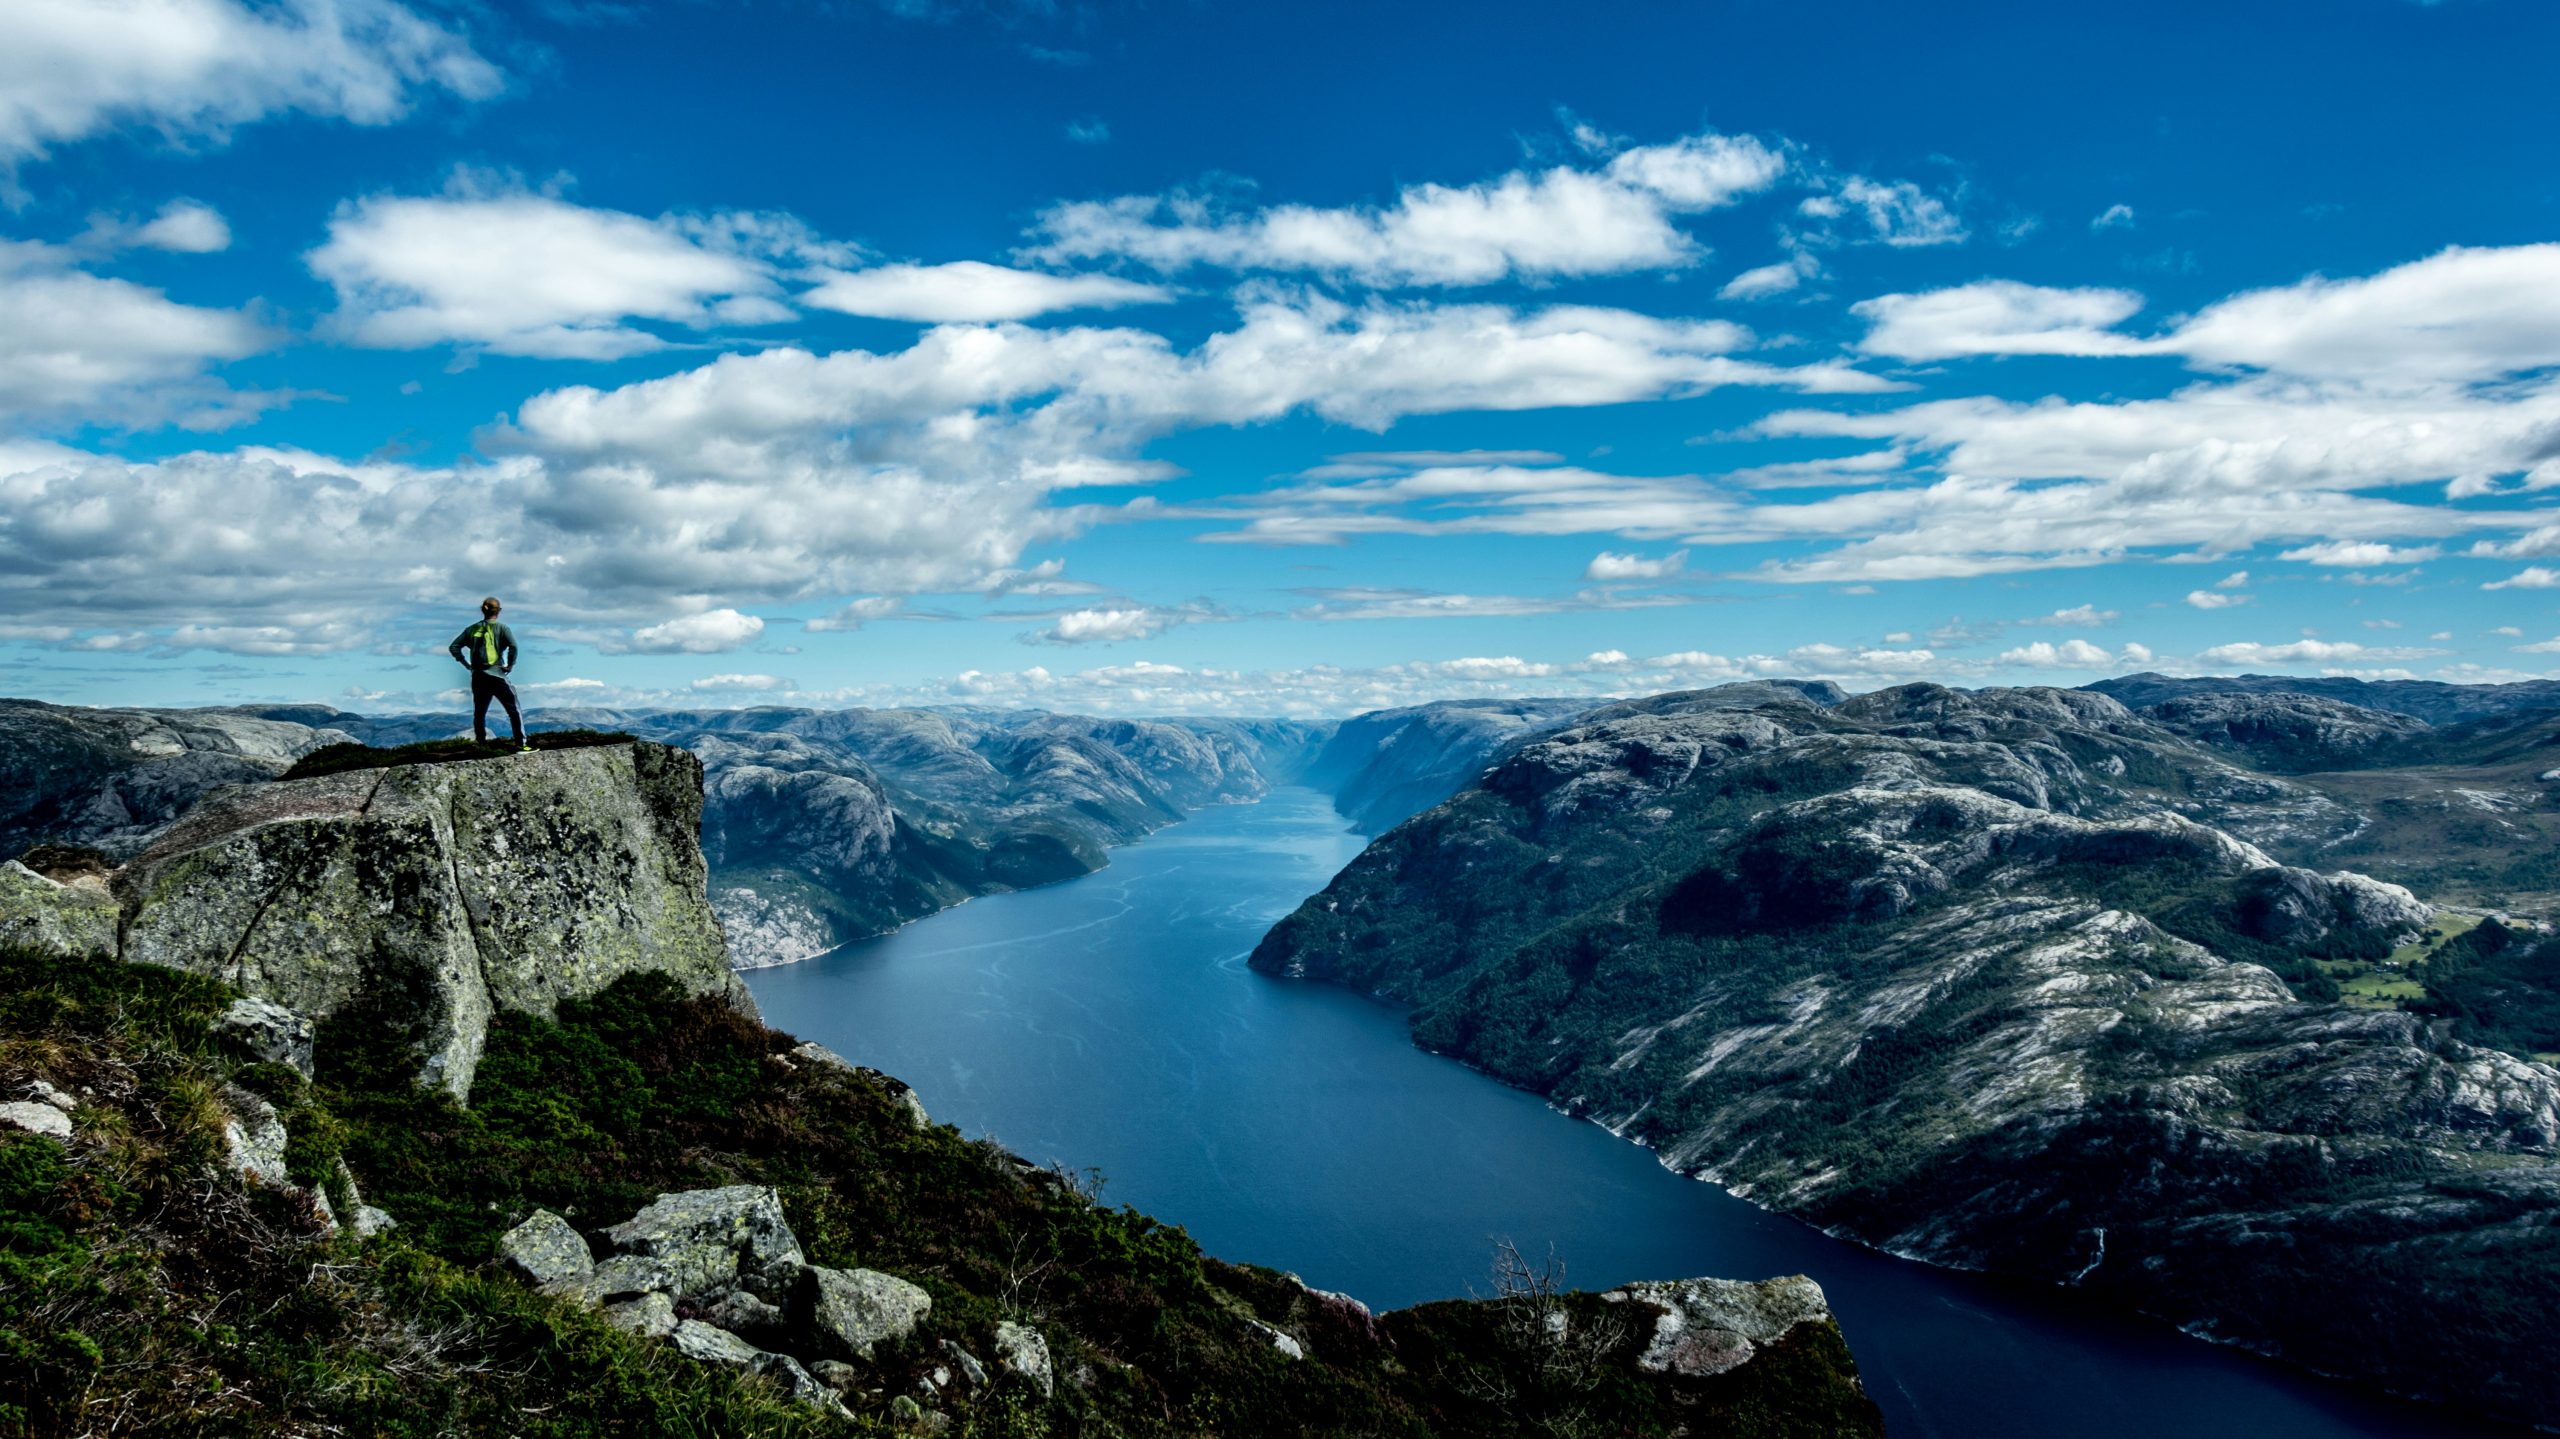 explore the stunning natural beauty of norway's fjords with their towering cliffs, crystal clear waters, and picturesque landscapes.